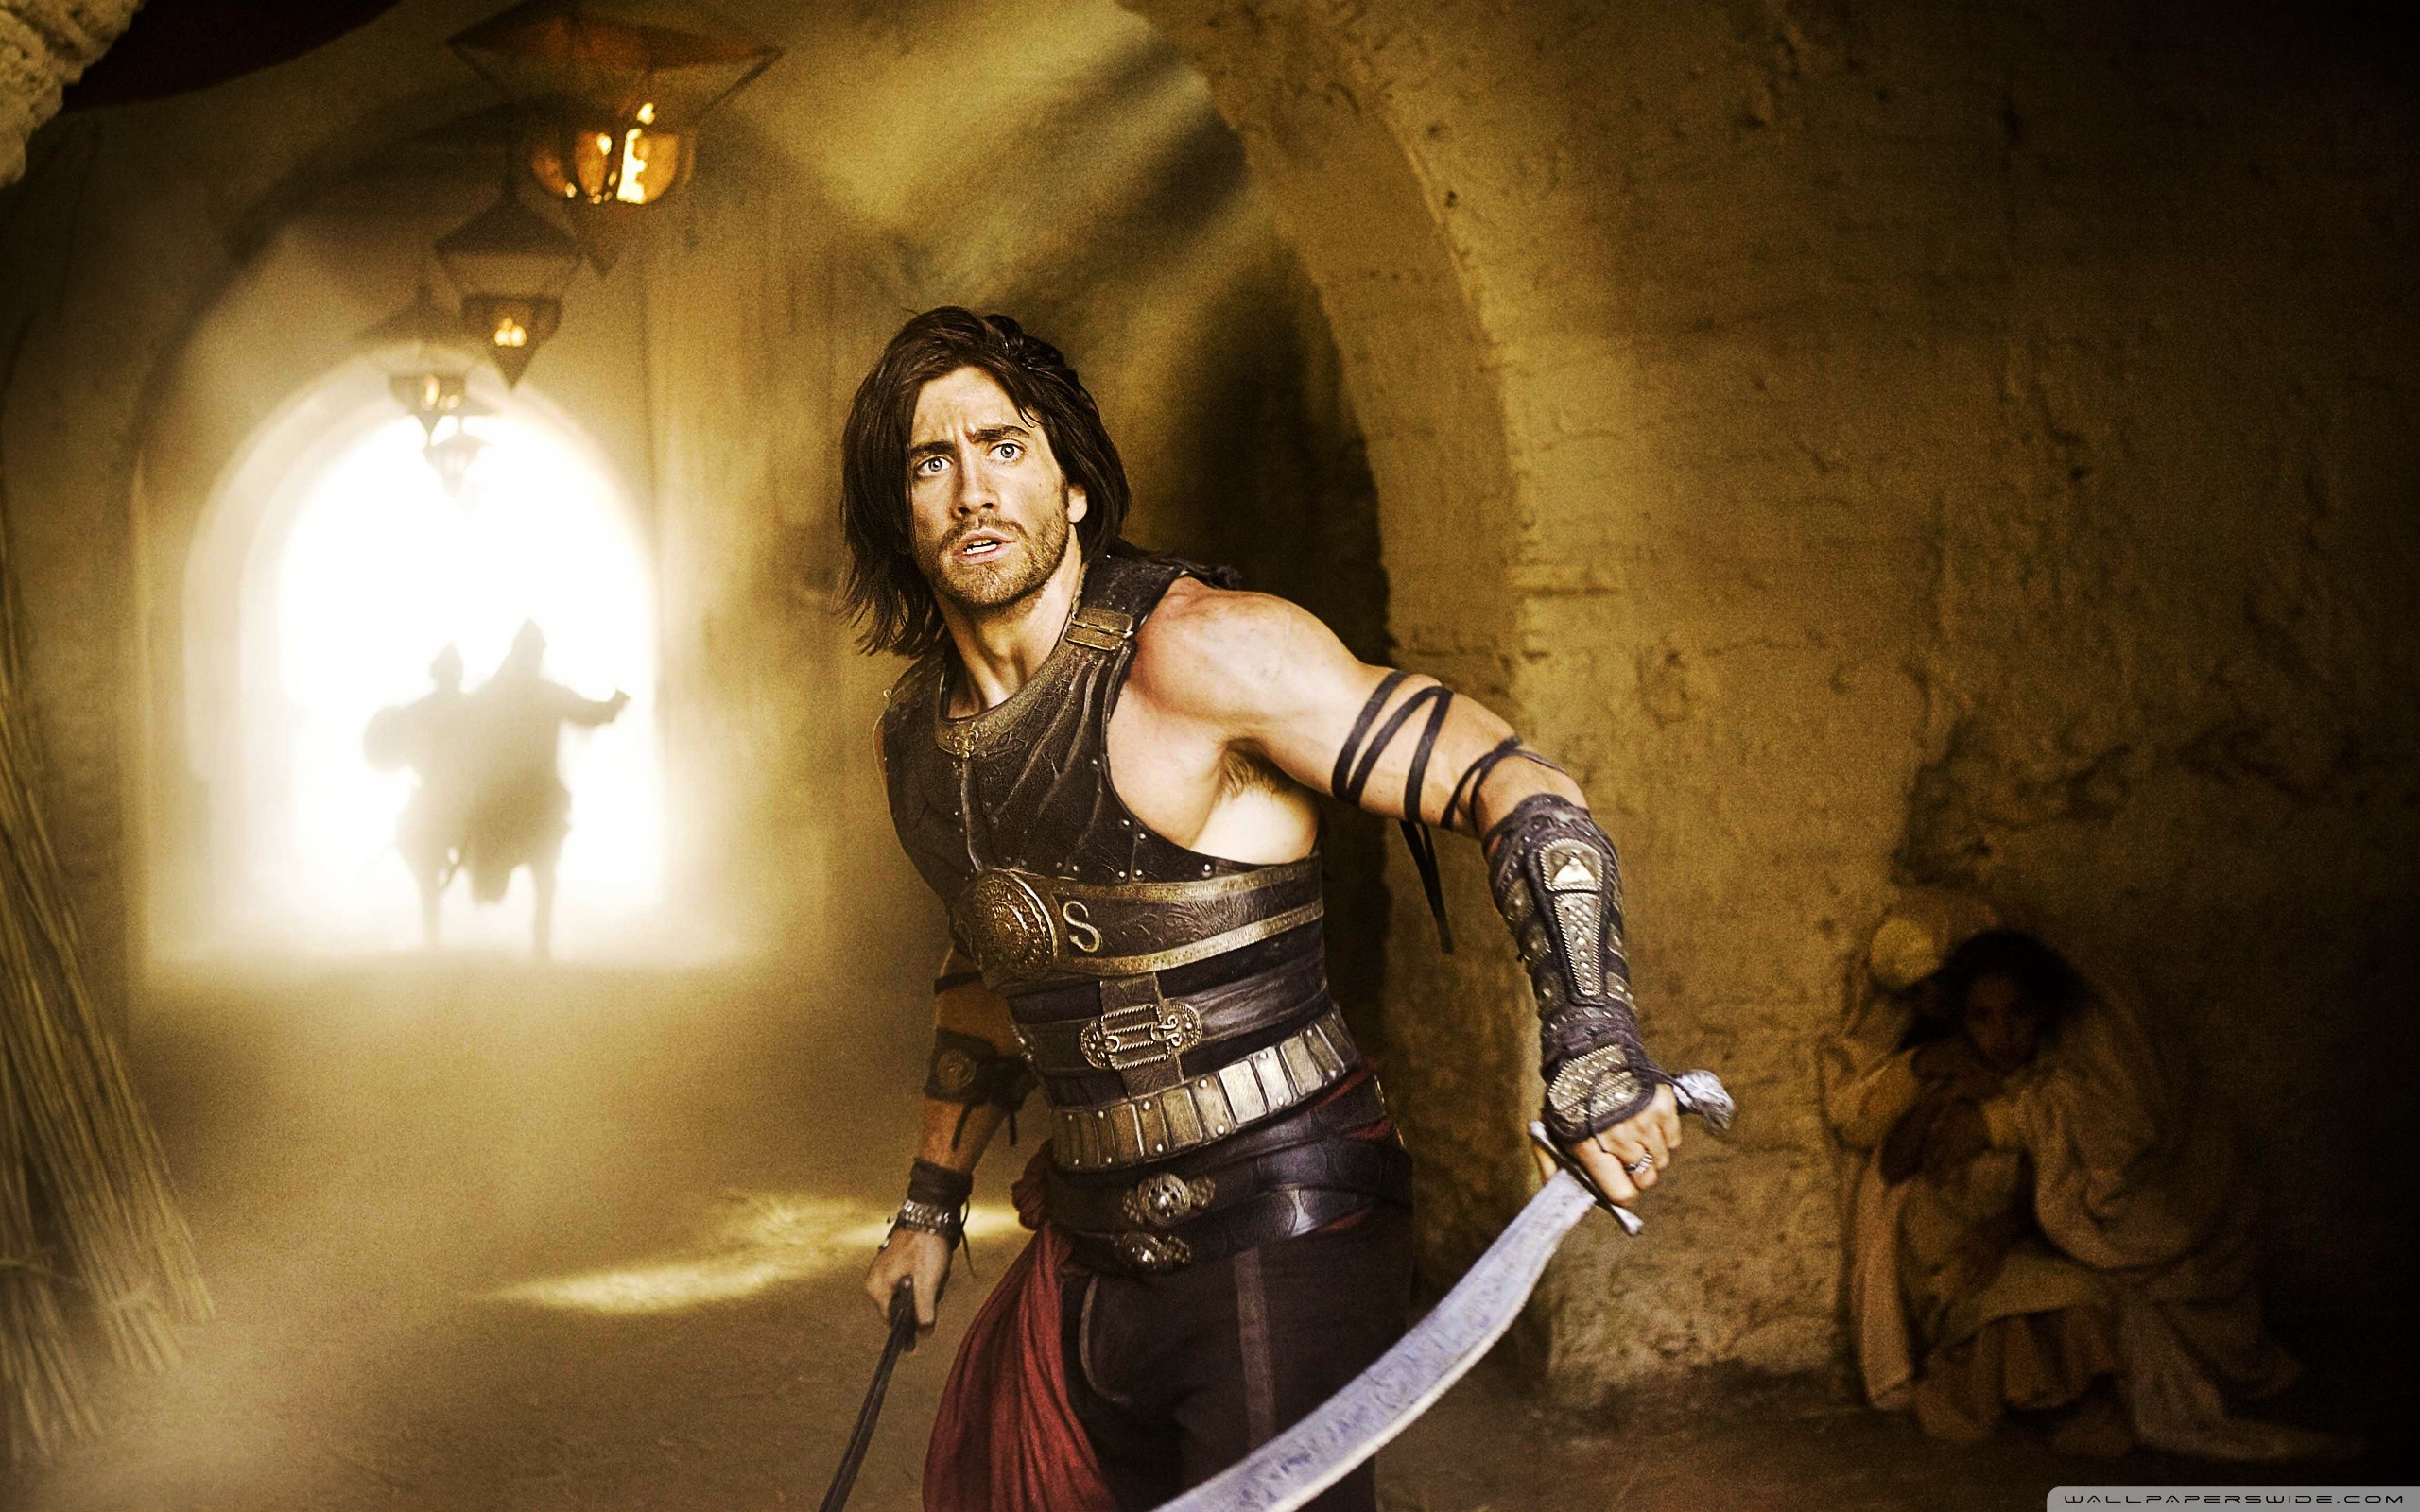 2560x1600 ... wallpaperswide com prince of persia hd desktop wallpapers for ...